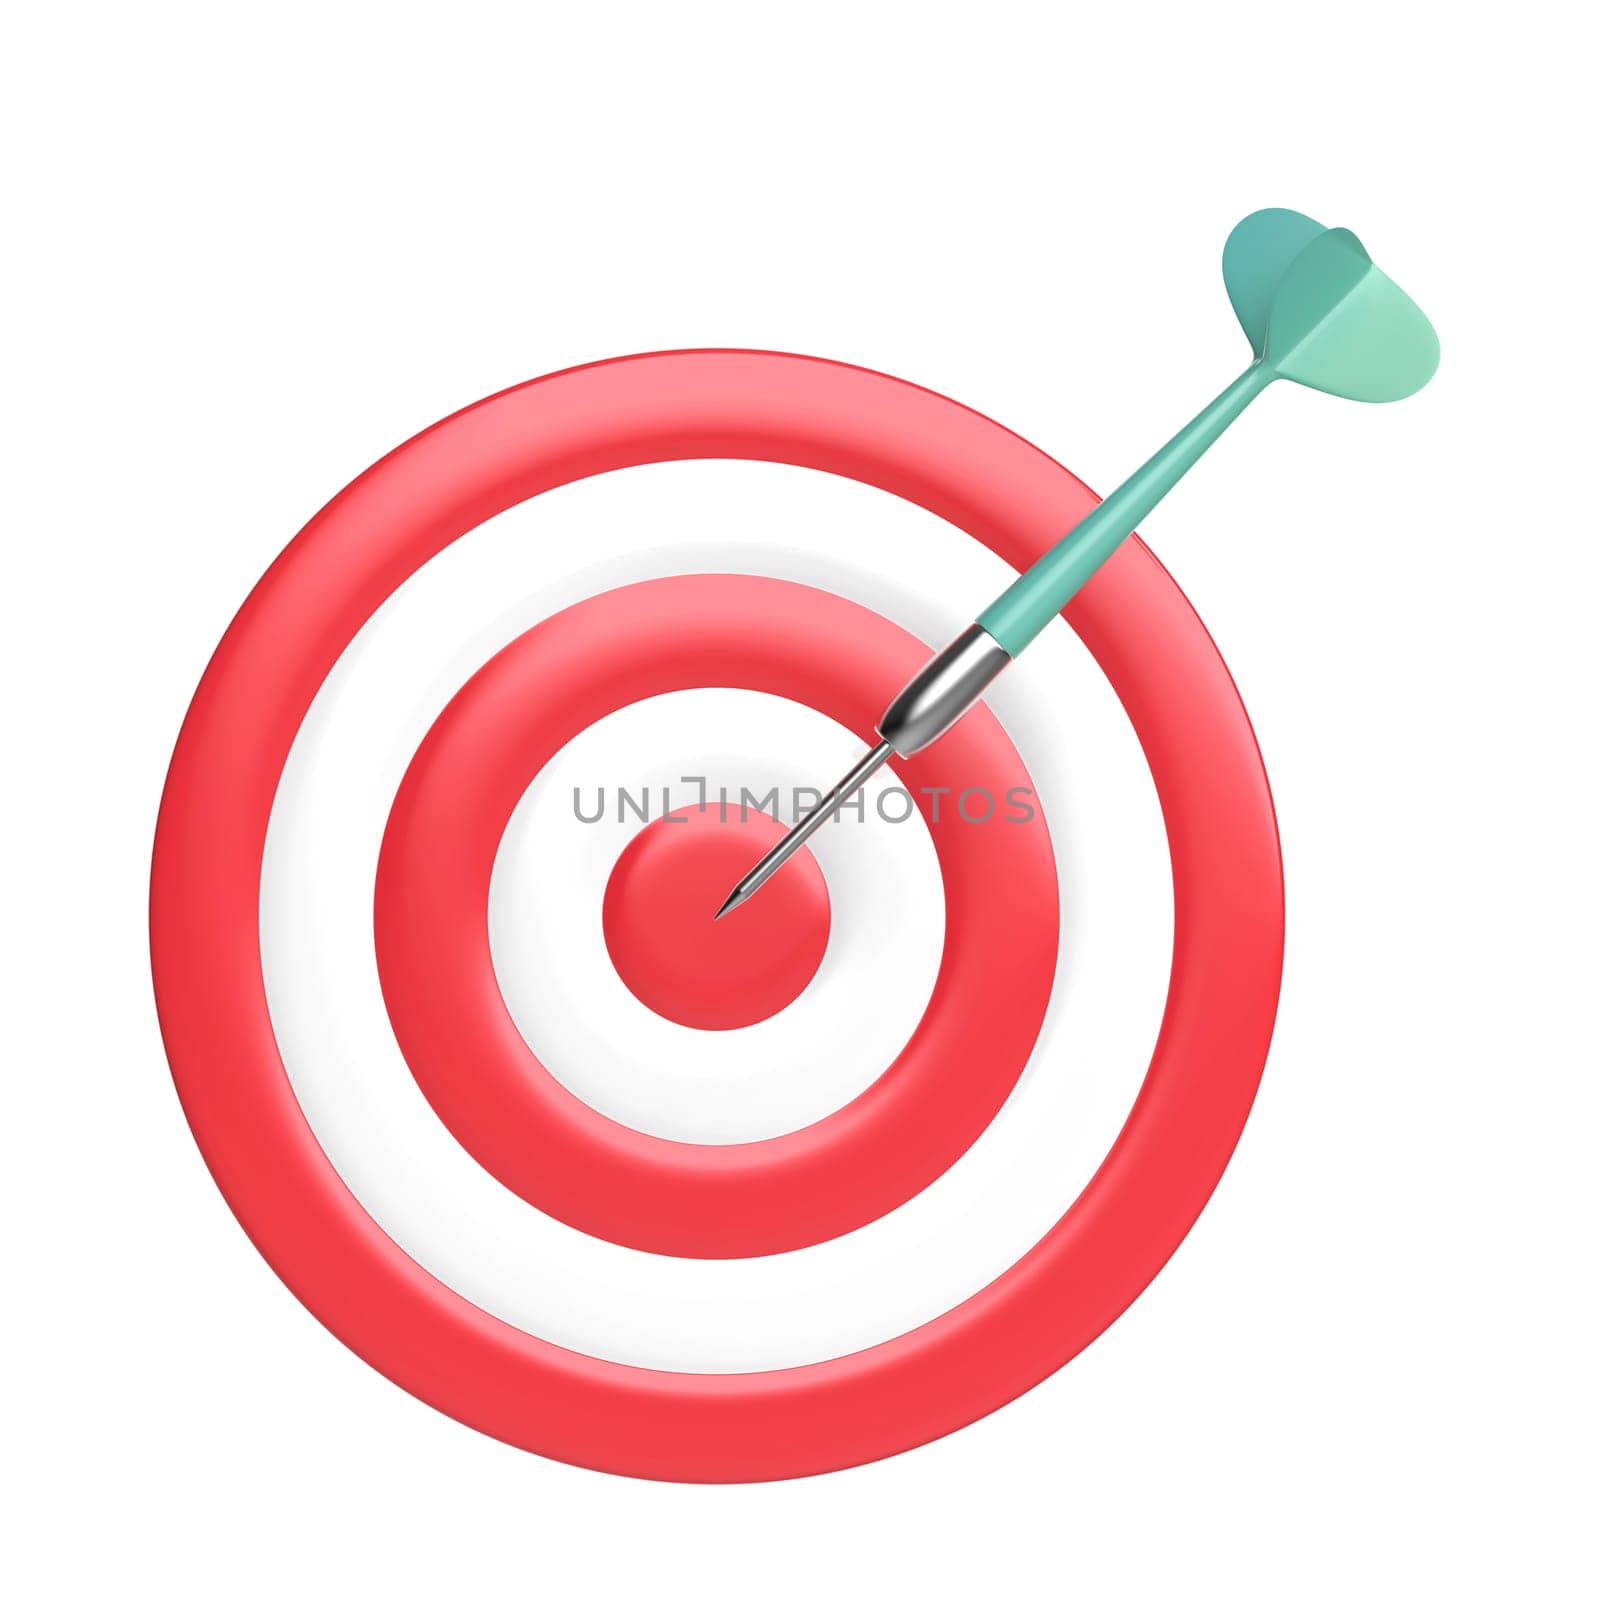 Dart aim to center of dartboard
 by magraphics